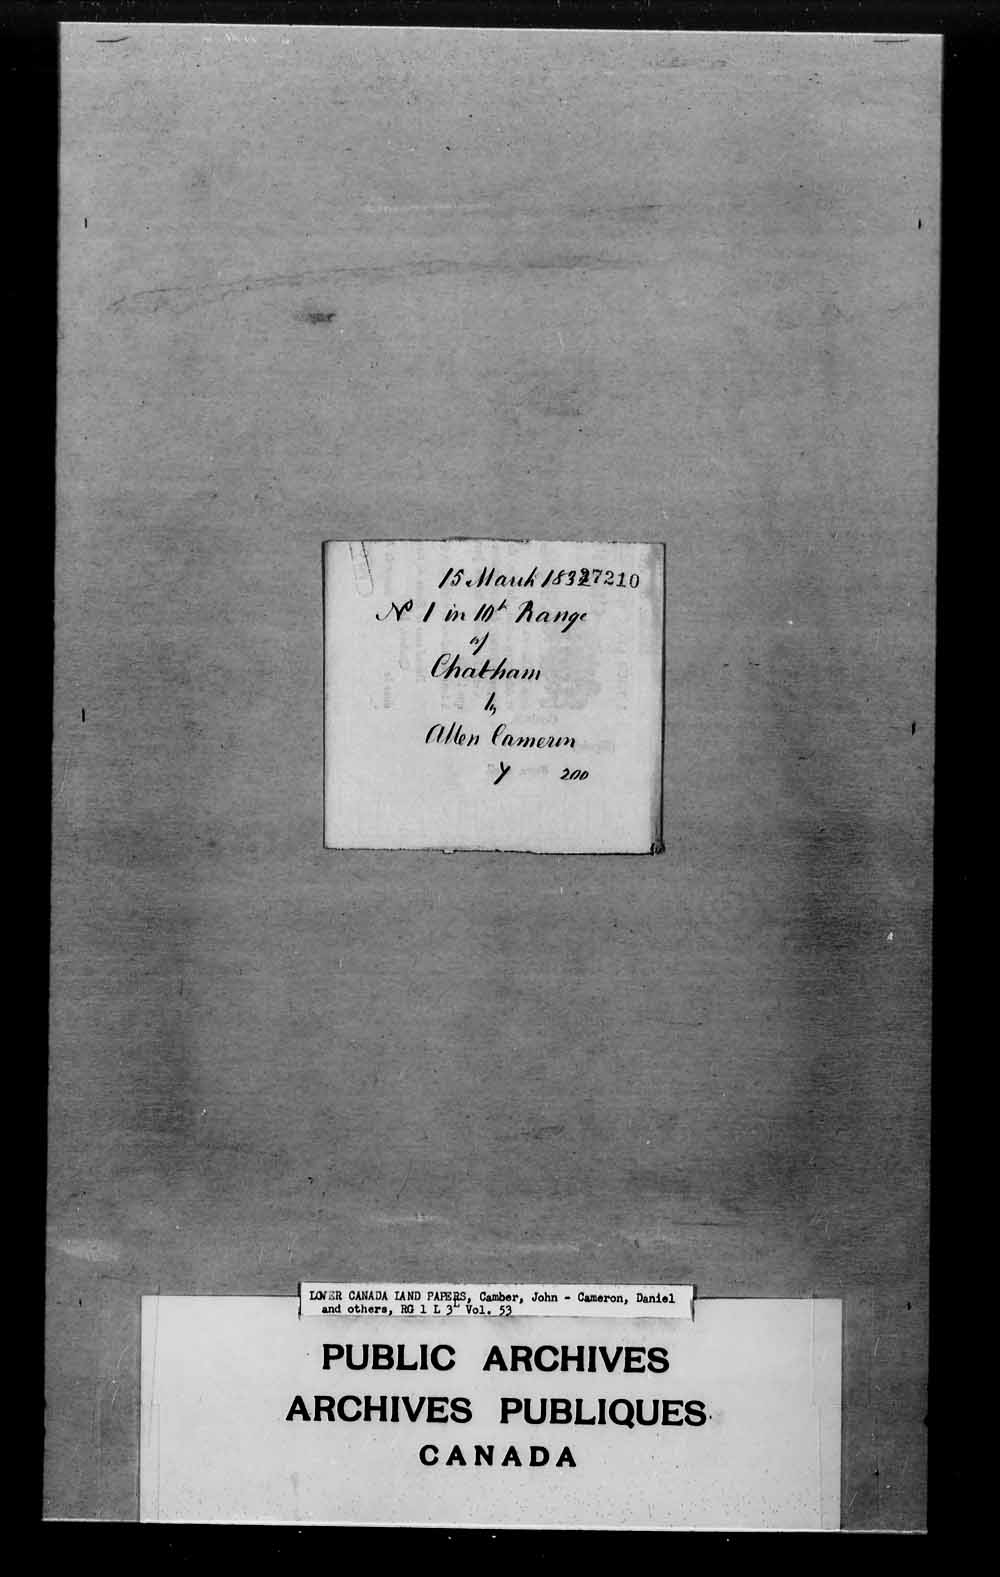 Digitized page of  for Image No.: e006611587